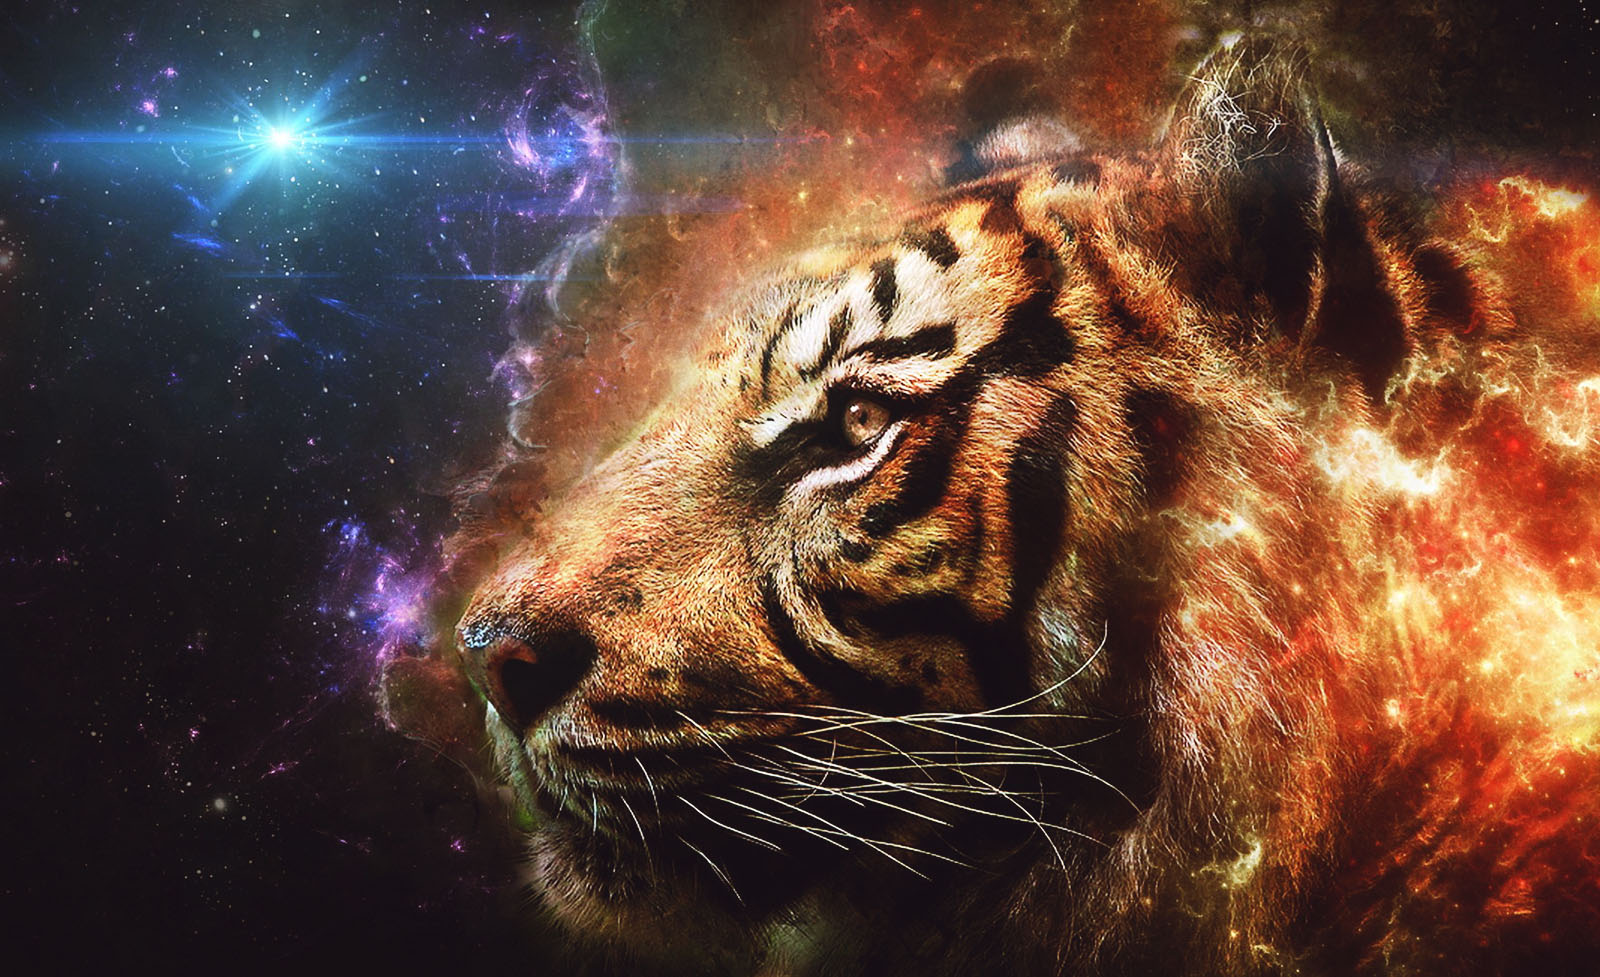 Feng Shui Astrology For February: the Month of the Earth Tiger - SOLANCHA